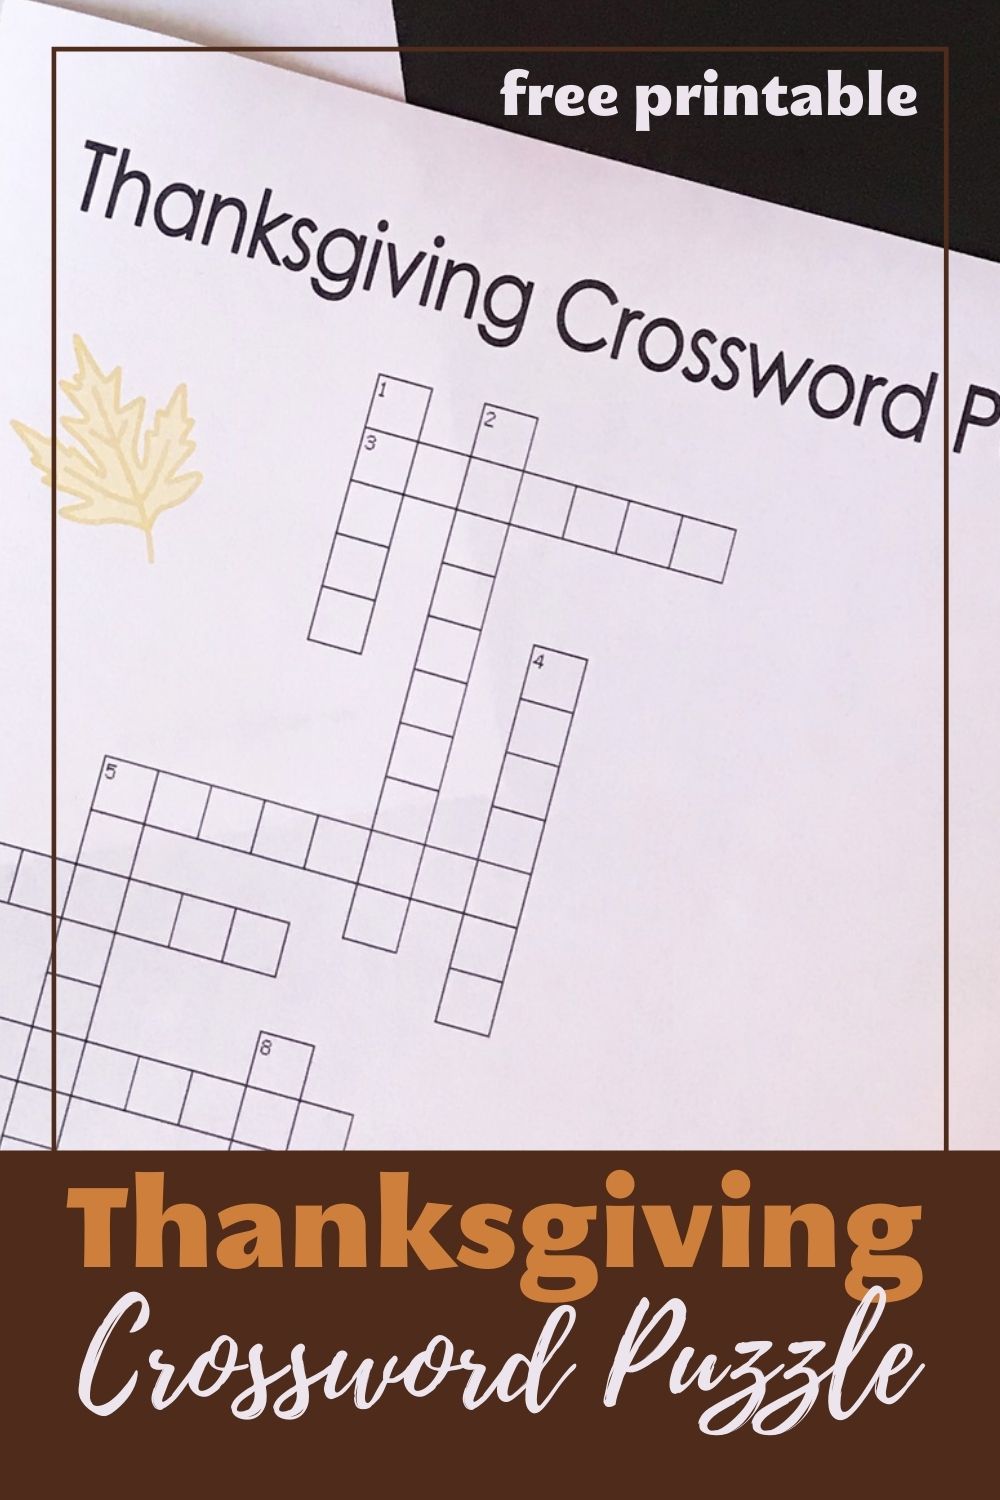 image of thanksgiving crossword puzzle with text overlay.